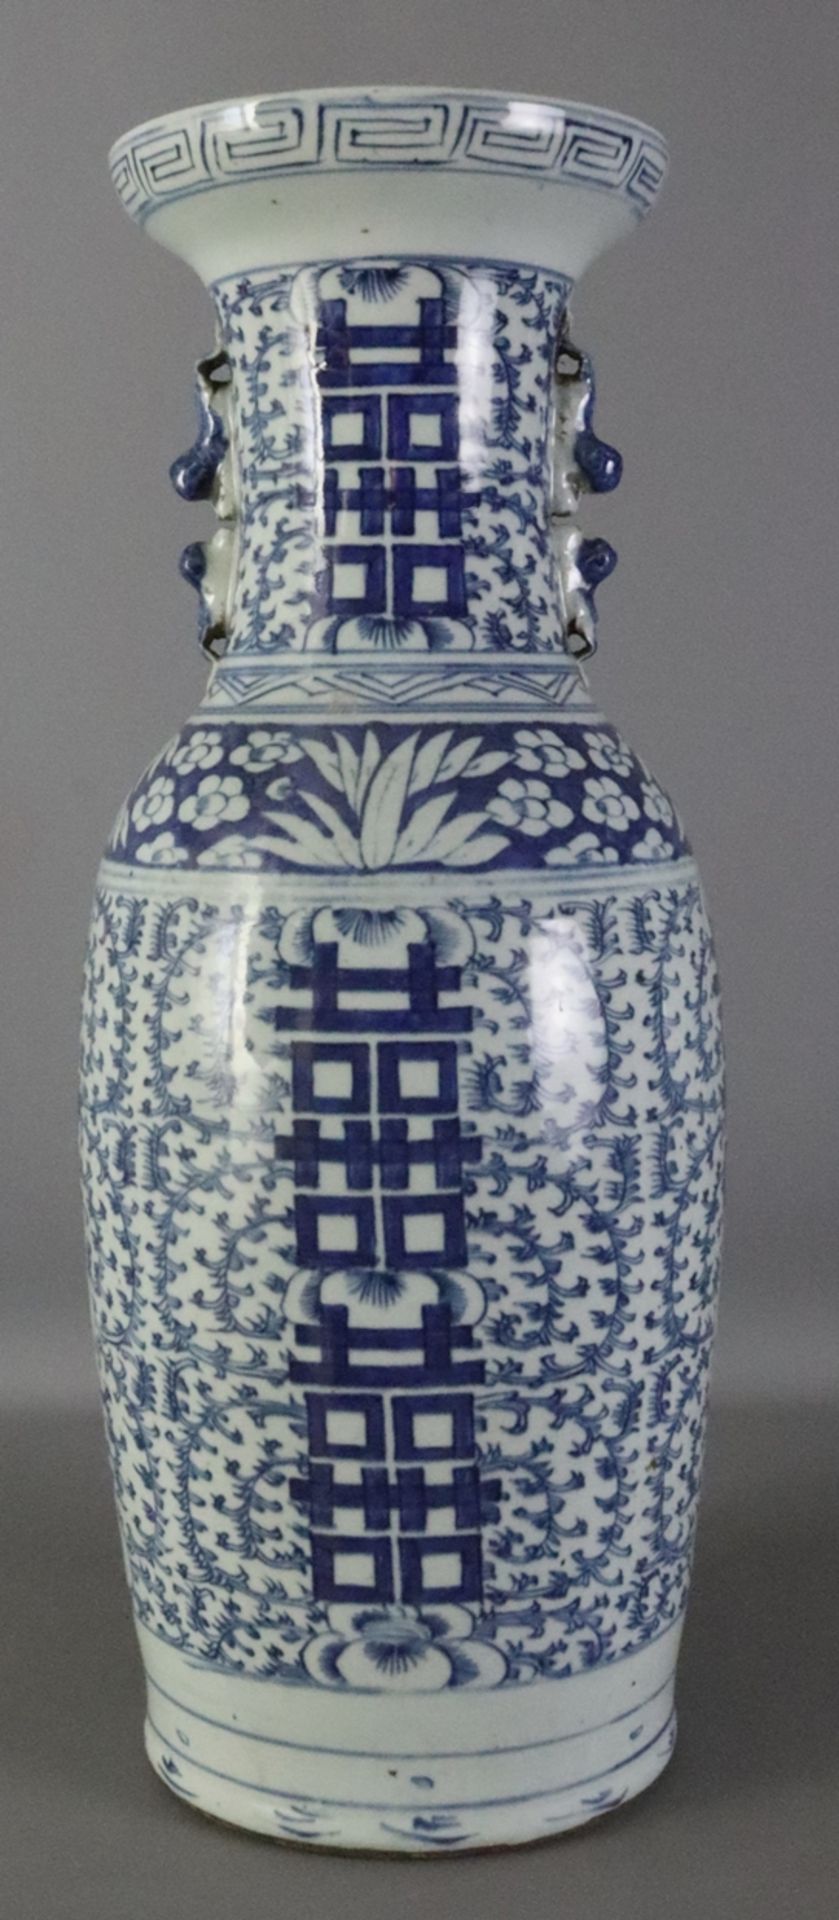 Qing dynasty, pair of vases China early 19th century - Image 2 of 3